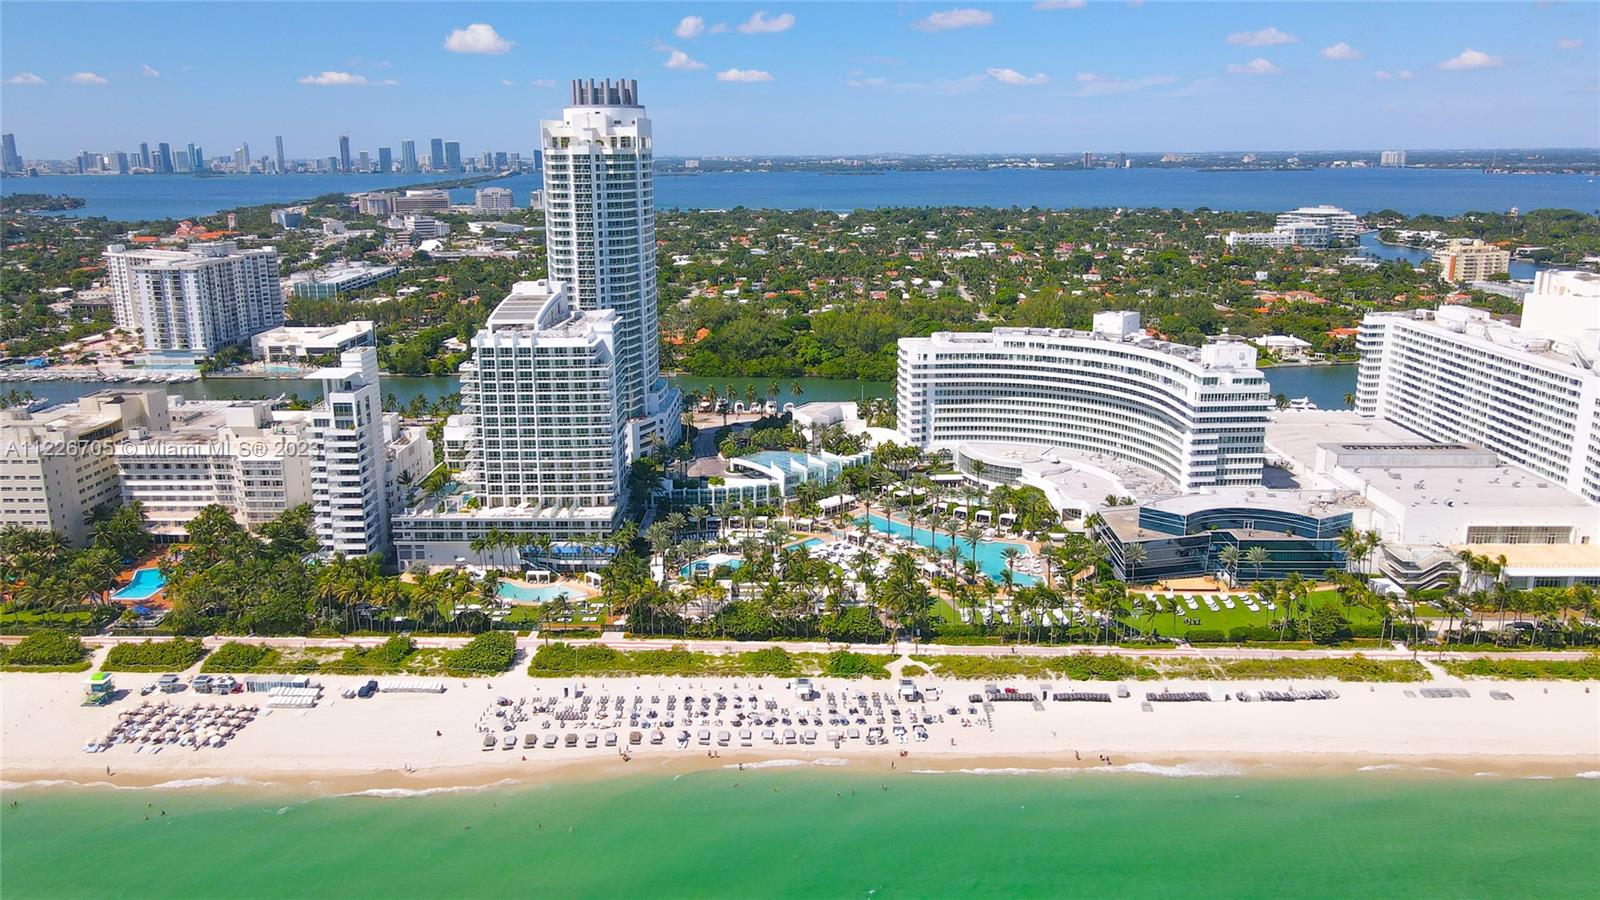 Beautiful 2BD/3BA w/views of the ocean & bay and 3 large balconies at Fontainebleau II. Enjoy full service, vacation-style living in a furnished turnkey unit with 2 king beds, 2 sleeper sofas & more. Enroll in hotel rental program & receive income while away! The Fontainebleau Resort offers luxury amenities on 22 oceanfront acres including award-winning restaurants, LIV night club, Lapis spa & state-of-the-art fitness center. Maintenance includes: AC, local calls, electricity, valet + daily free breakfast in the owner’s lounge.